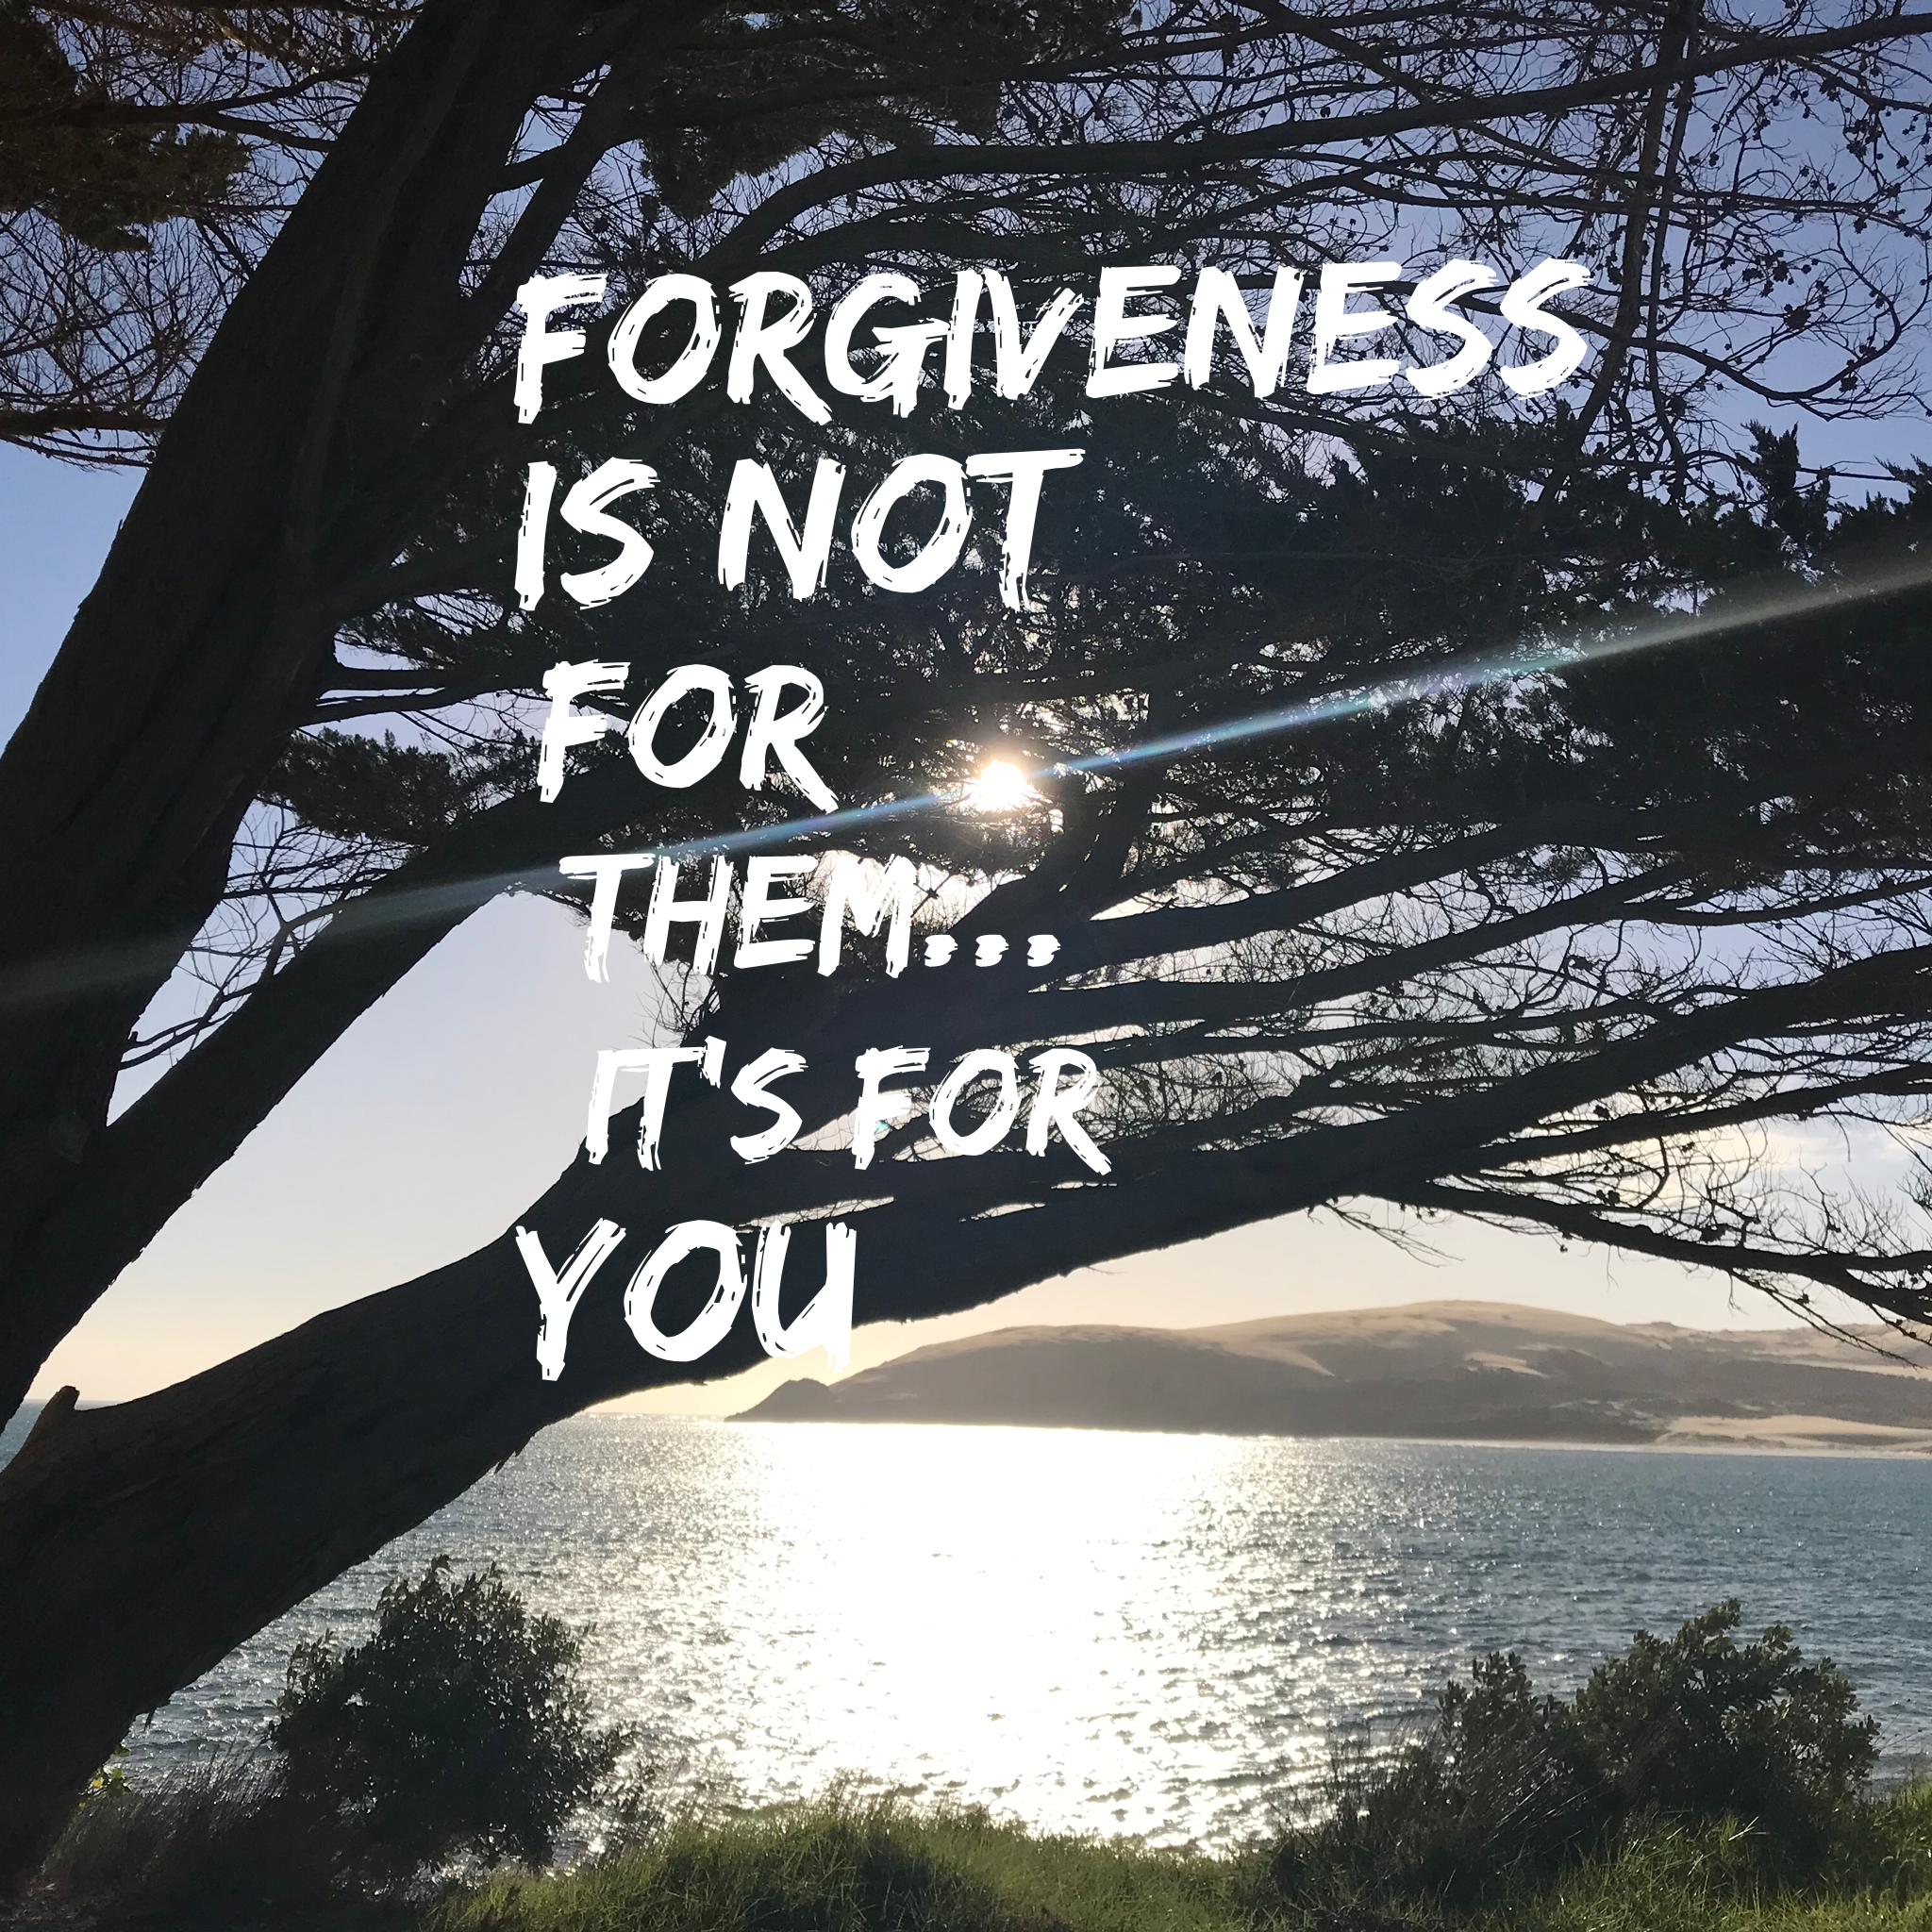 Having trouble forgiving someone? This may help…